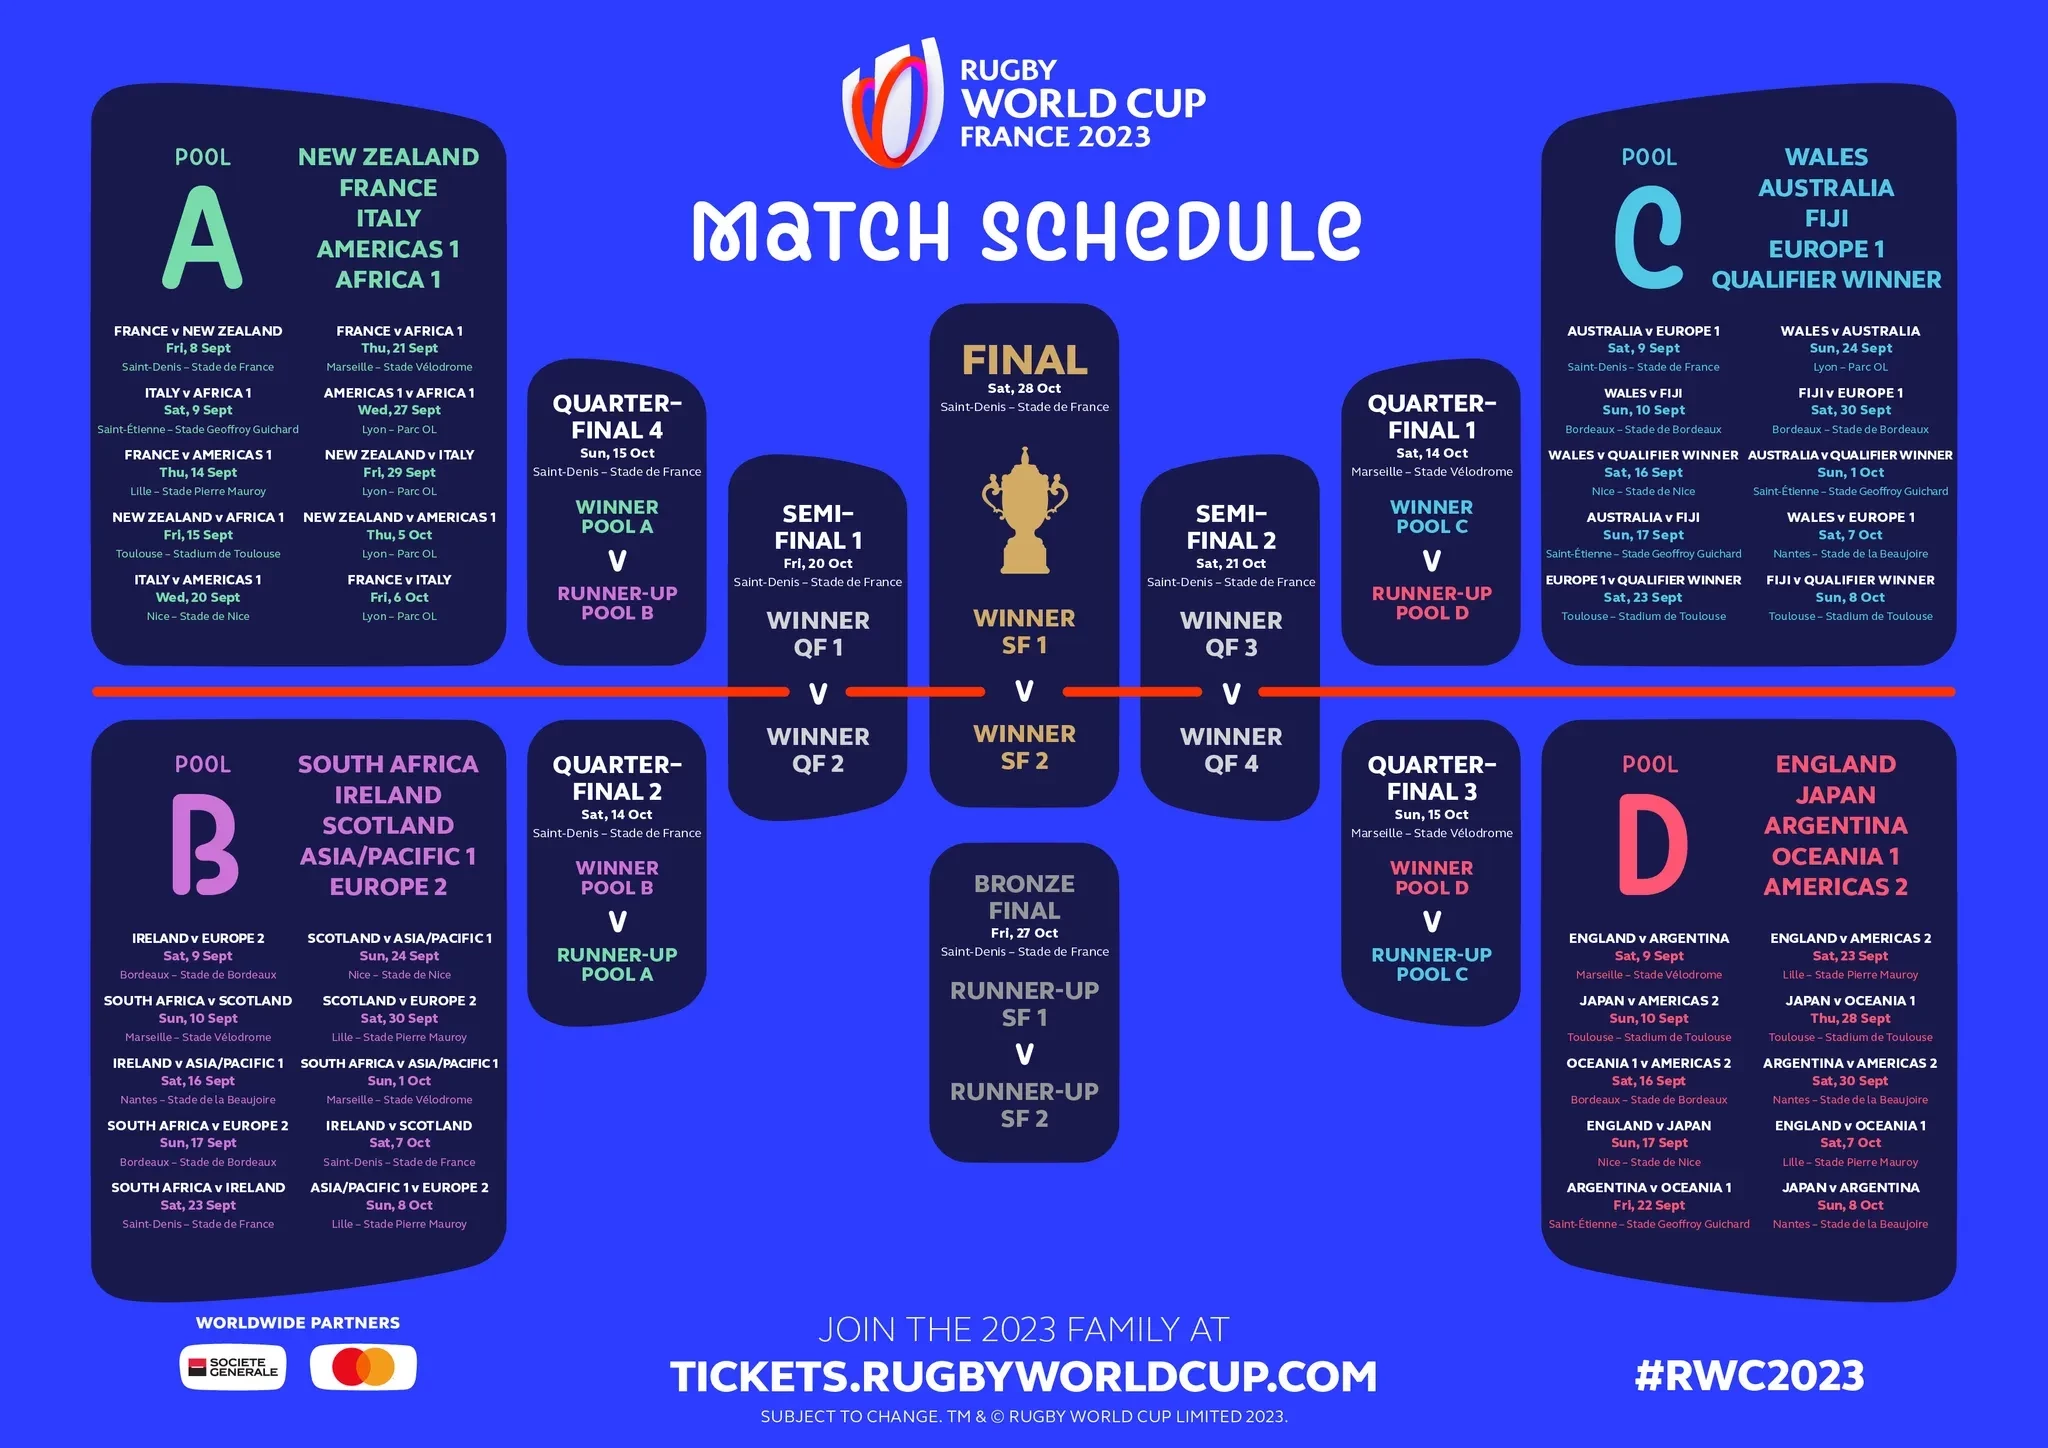 The match schedule for the 2023 Rugby World Cup in France has been published ©World Rugby